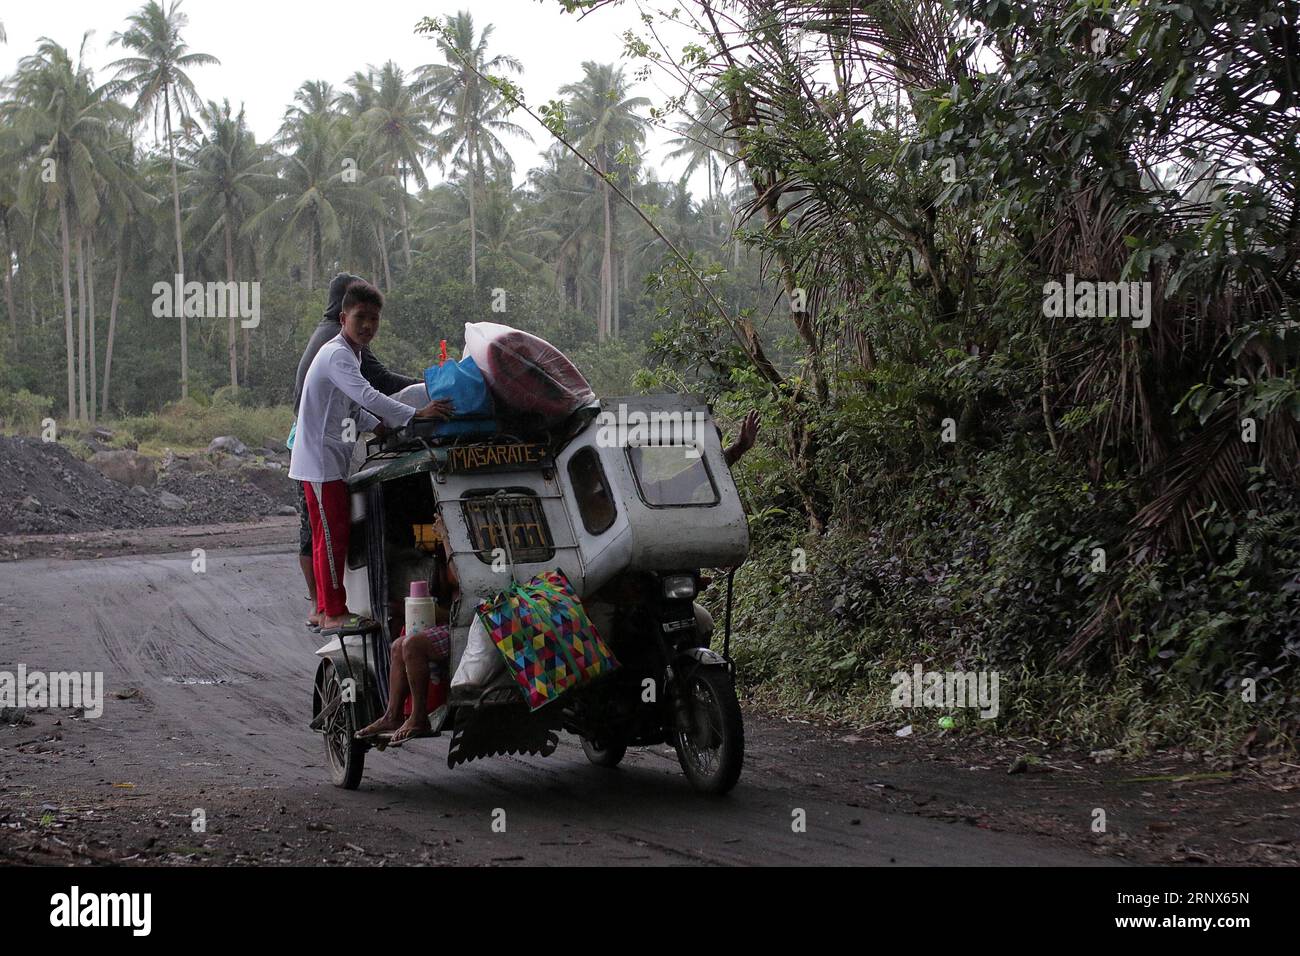 (180114) -- ALBAY, Jan. 14, 2018 () -- Residents flee with belongings on board a tricycle as they move to an evacuation center in Albay Province, the Philippines, Jan. 14, 2018. Nearly a thousand families living close to the Mayon Volcano evacuated from their homes as Philippine authorities raised its alert level of the Mayon volcano on Sunday for the second time in less than 24 hours from increasing unrest to increased tendency towards eruption within weeks or even days. (/Stringer) (zjy) THE PHILIPPINES-ALBAY-VOLCANO-ALERT Xinhua PUBLICATIONxNOTxINxCHN Stock Photo